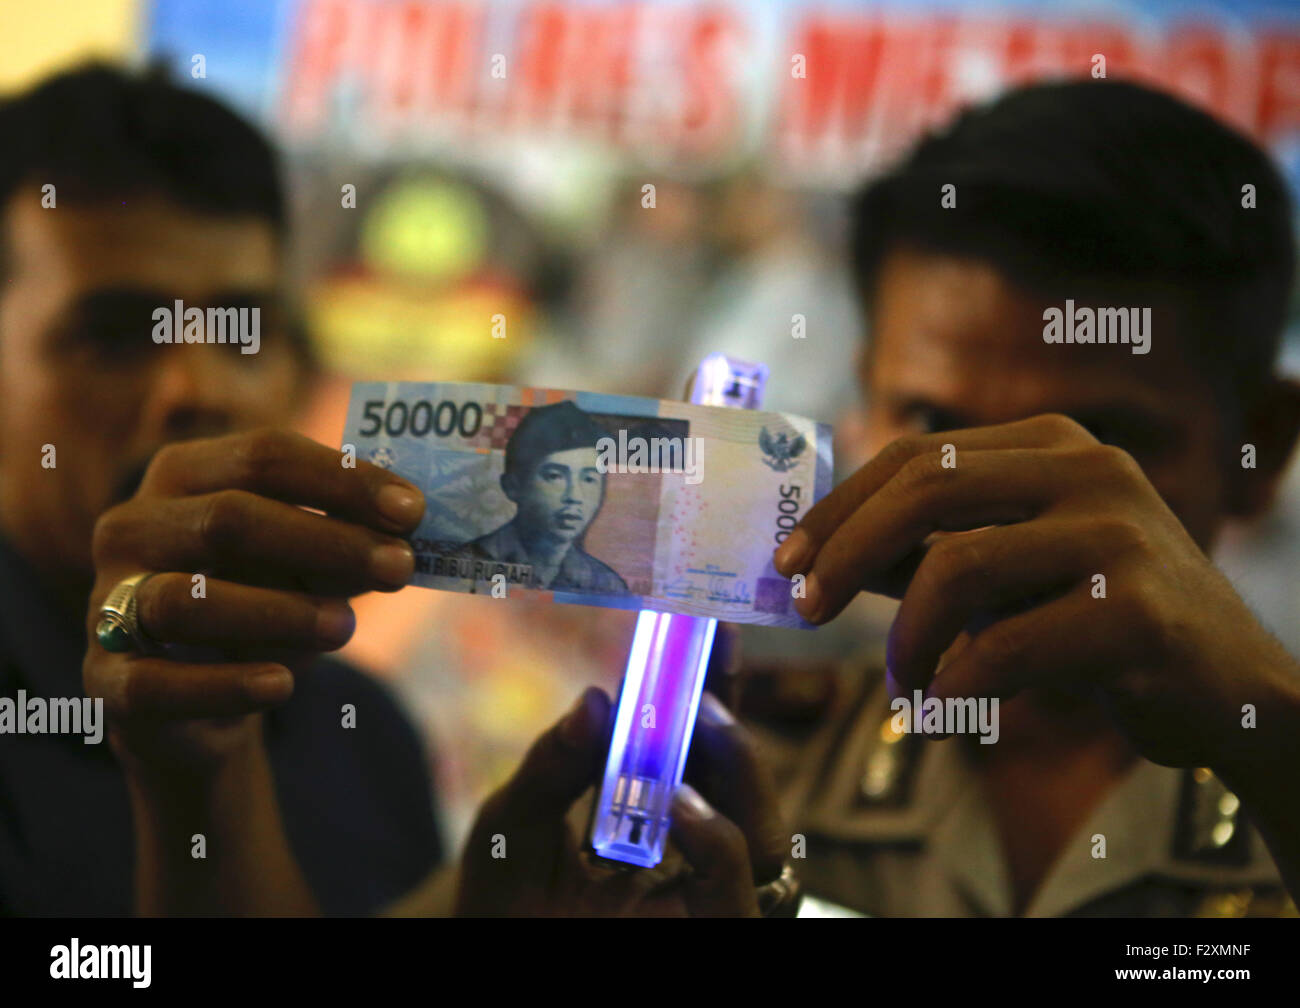 By using ultraviolet light, check and ensure the authenticity of the money Stock Photo